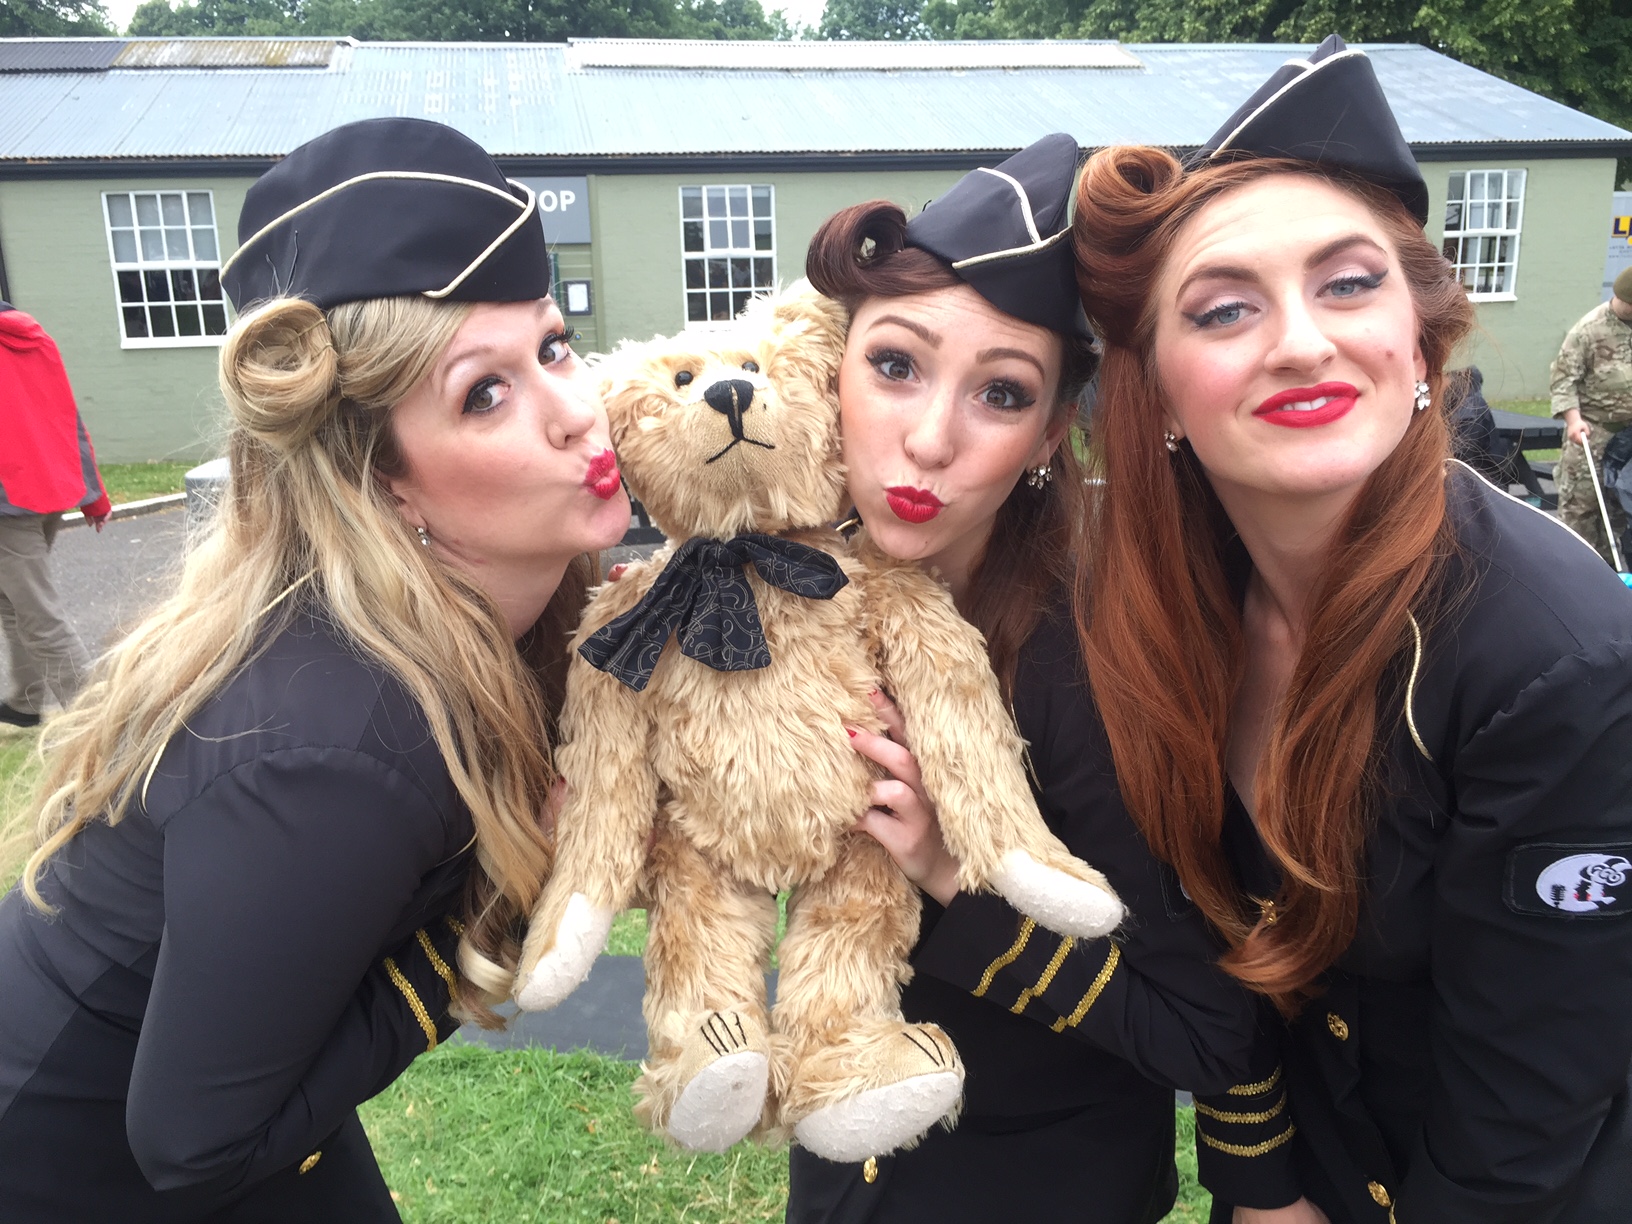 Flying Legends Duxford. New Supergroup: "Bertie & the Manhattan Dolls"! What do you think?